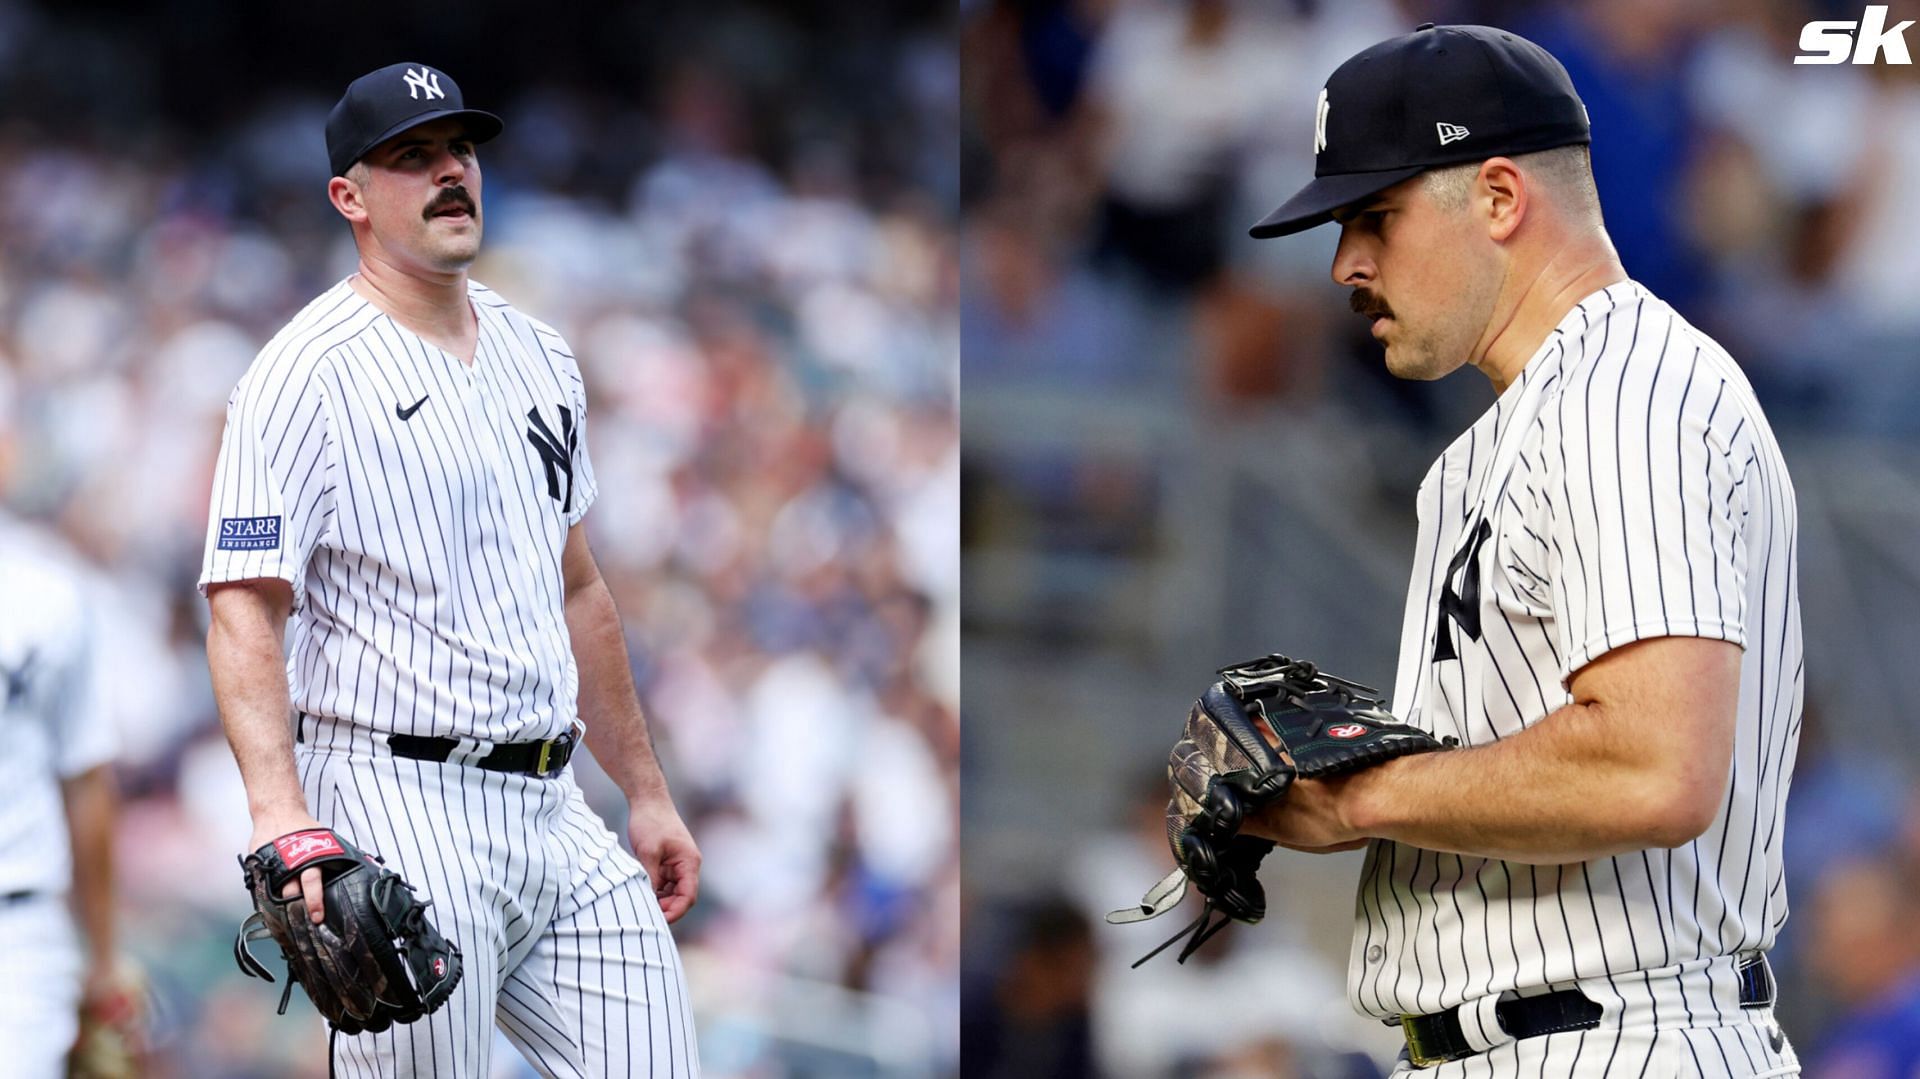 With the Carlos Rodon deal the Yankees have gotten better for the